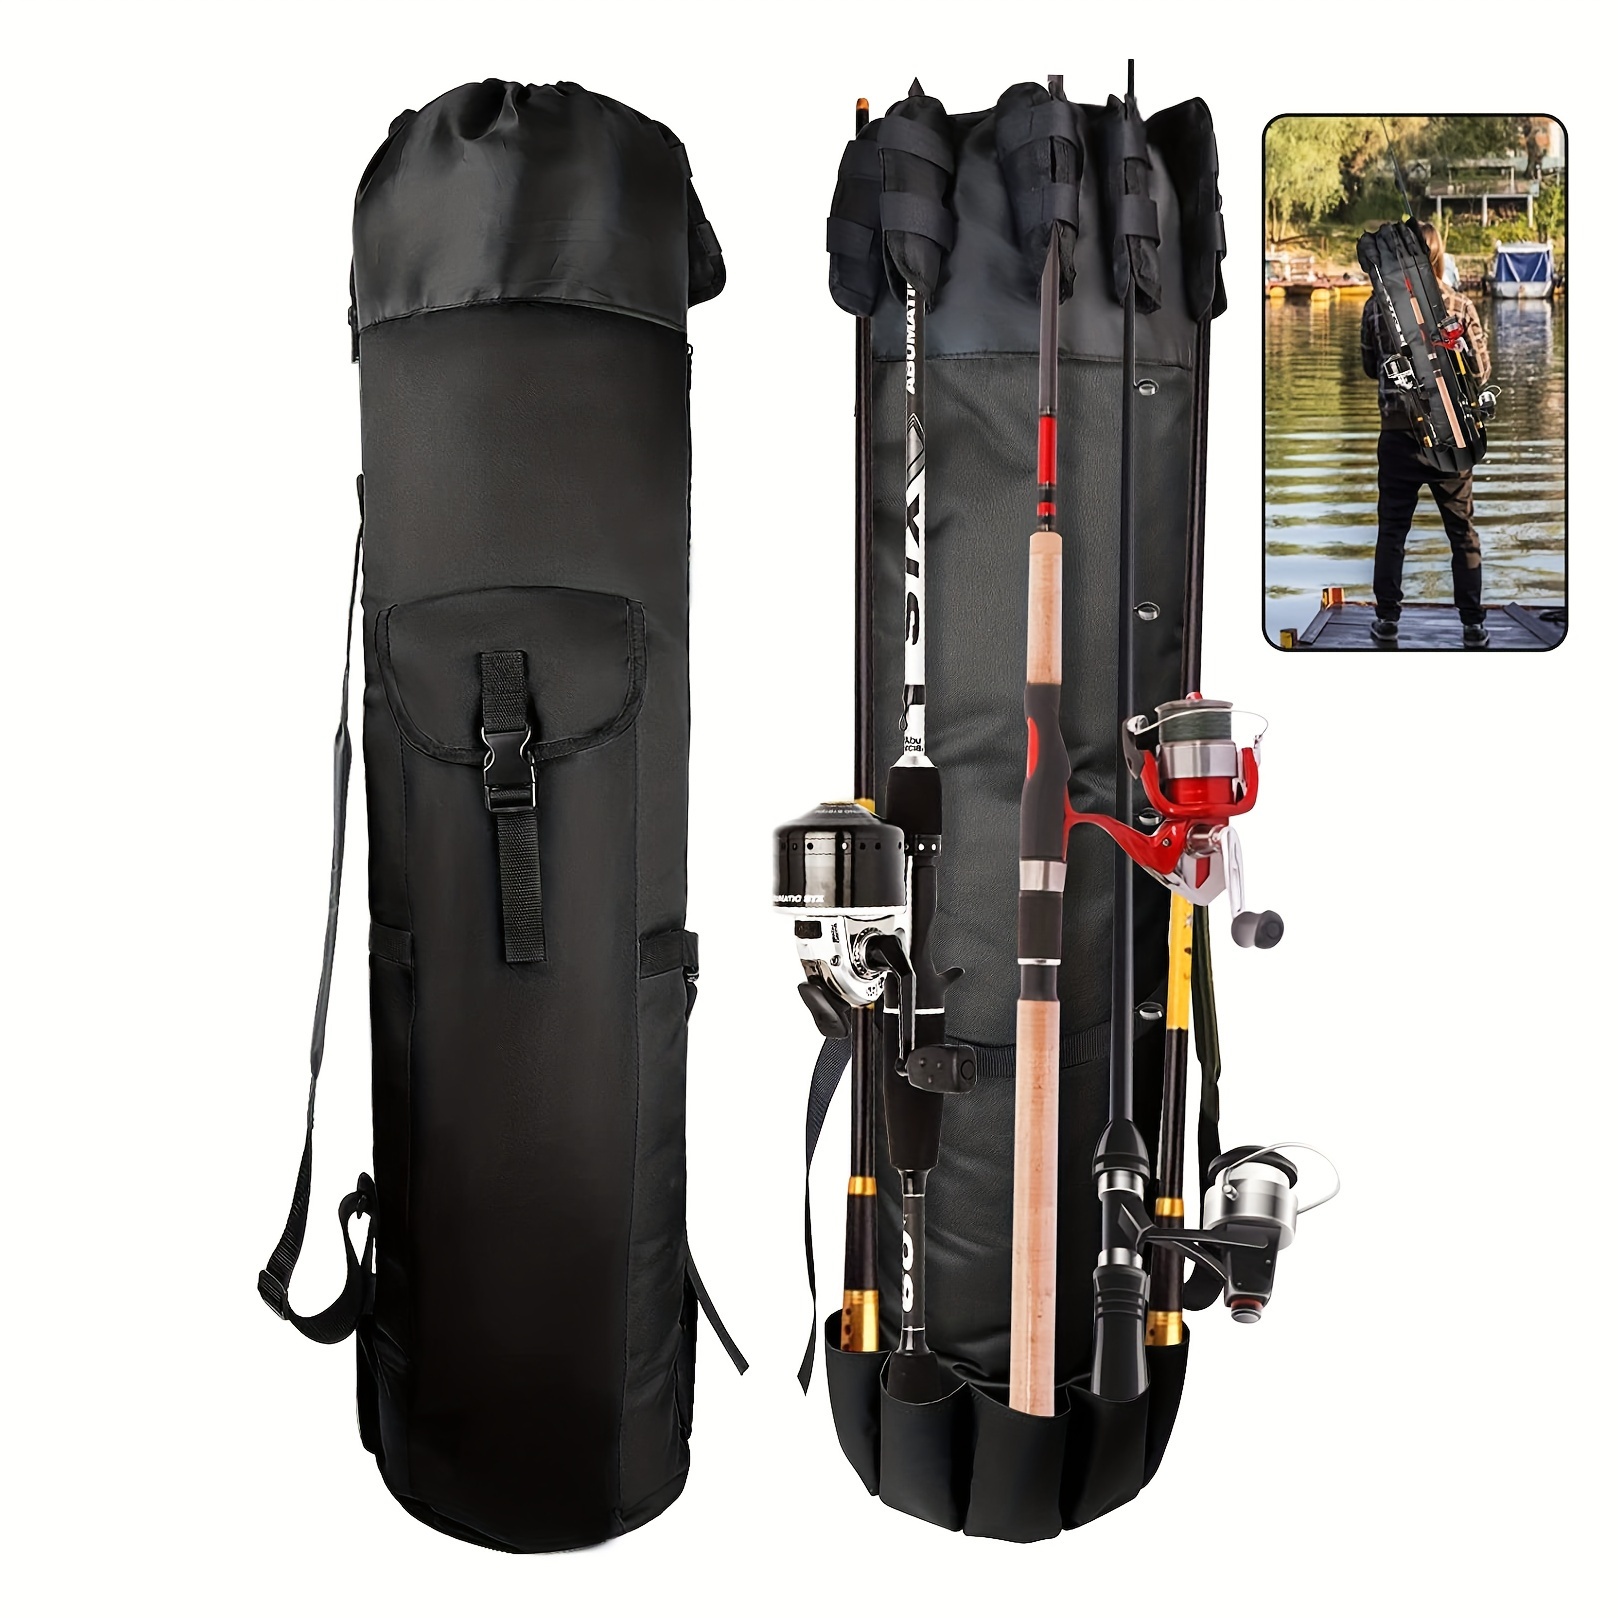 * Fishing Rod Bag - Waterproof, Lightweight, Holds 5 Poles, Multifunctional  Stand, Large Capacity Fishing Gear Organizer for Men